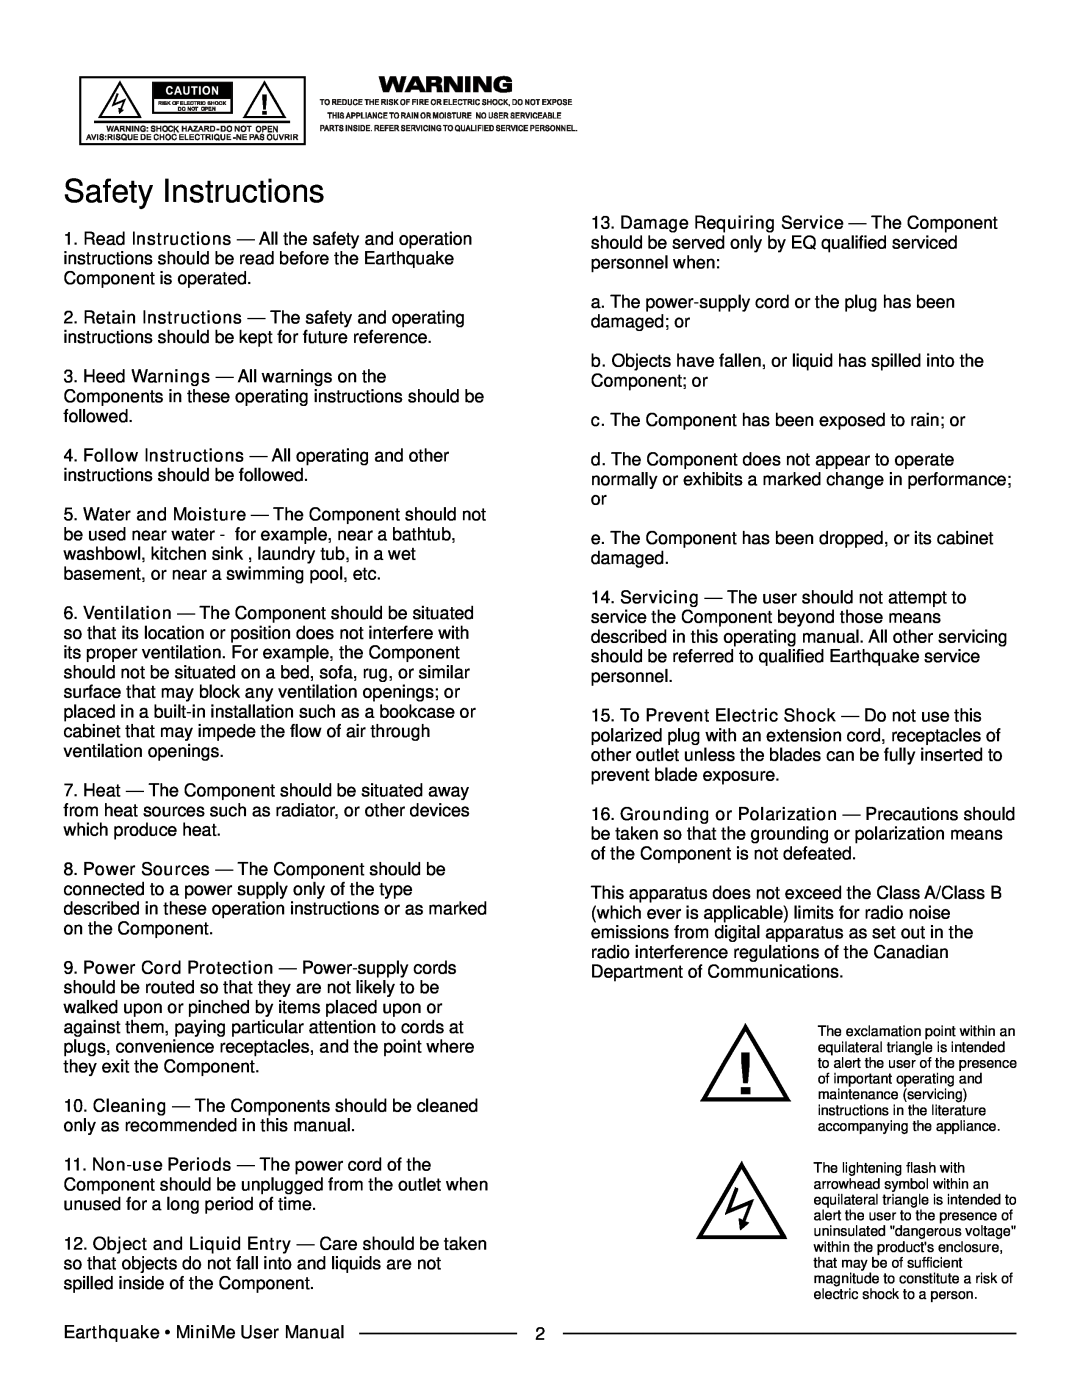 Earthquake Sound P8 manual Safety Instructions 